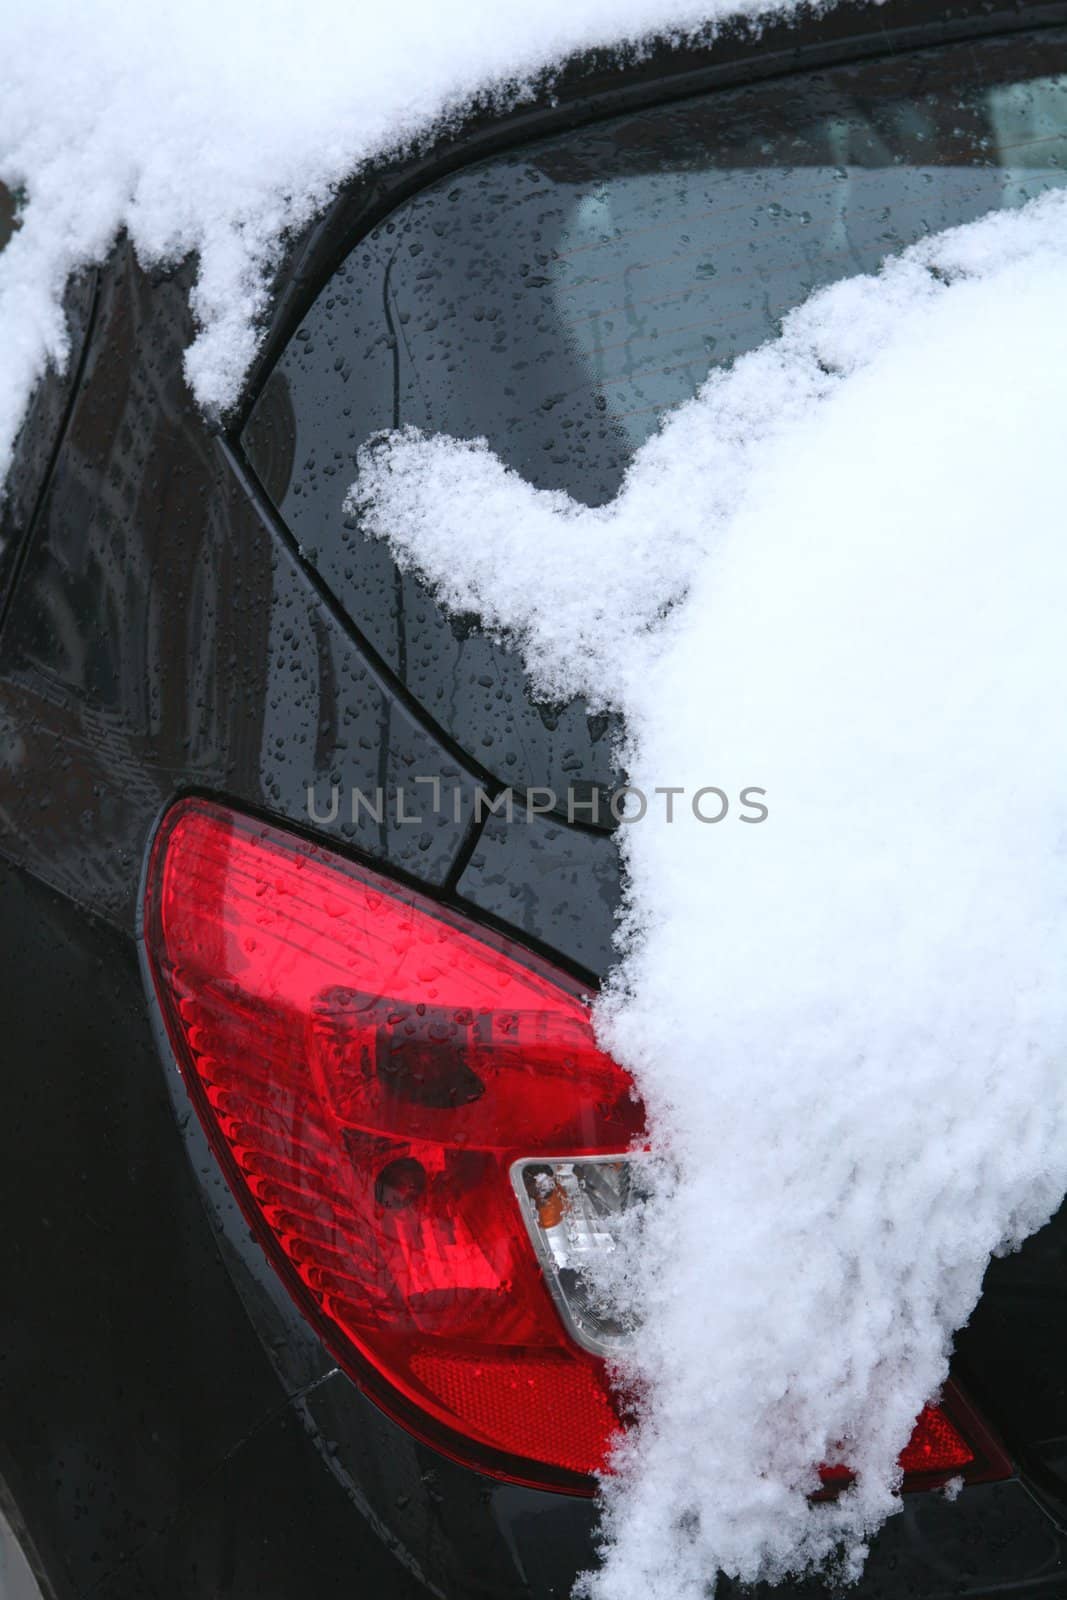 fragment of the car after big snowfall